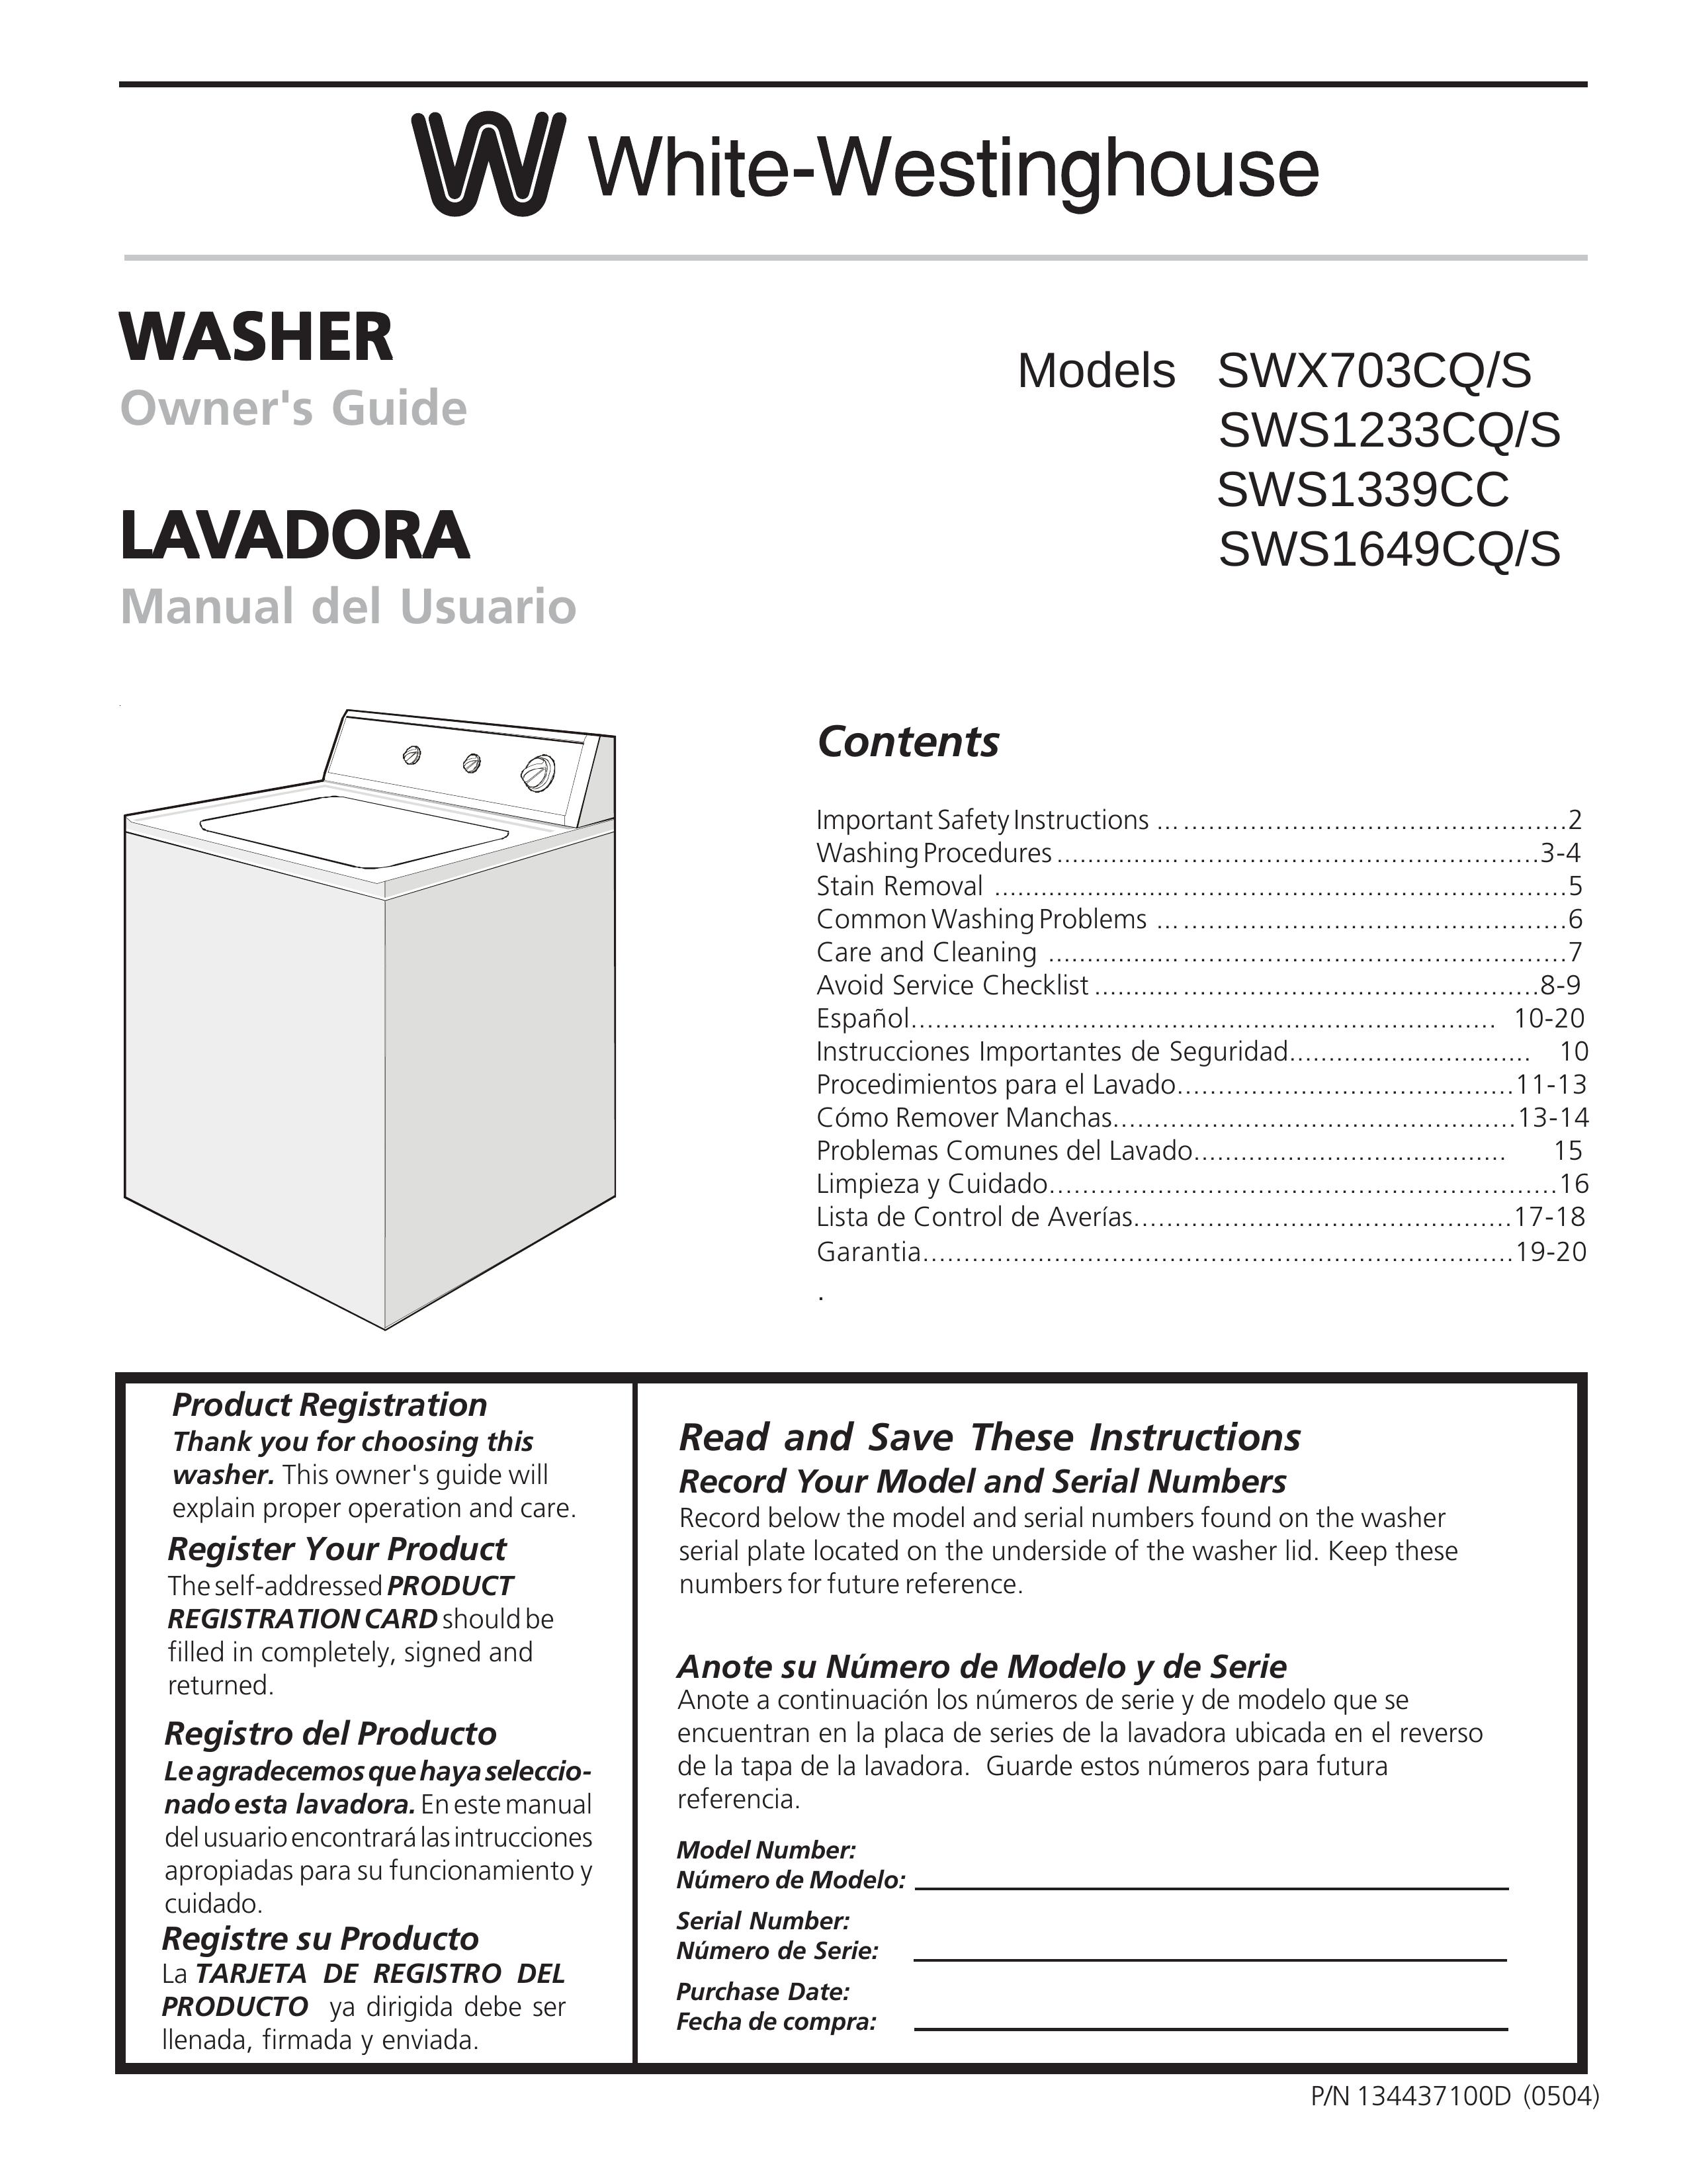 White-Westinghouse SWS1233CQ/S Washer User Manual